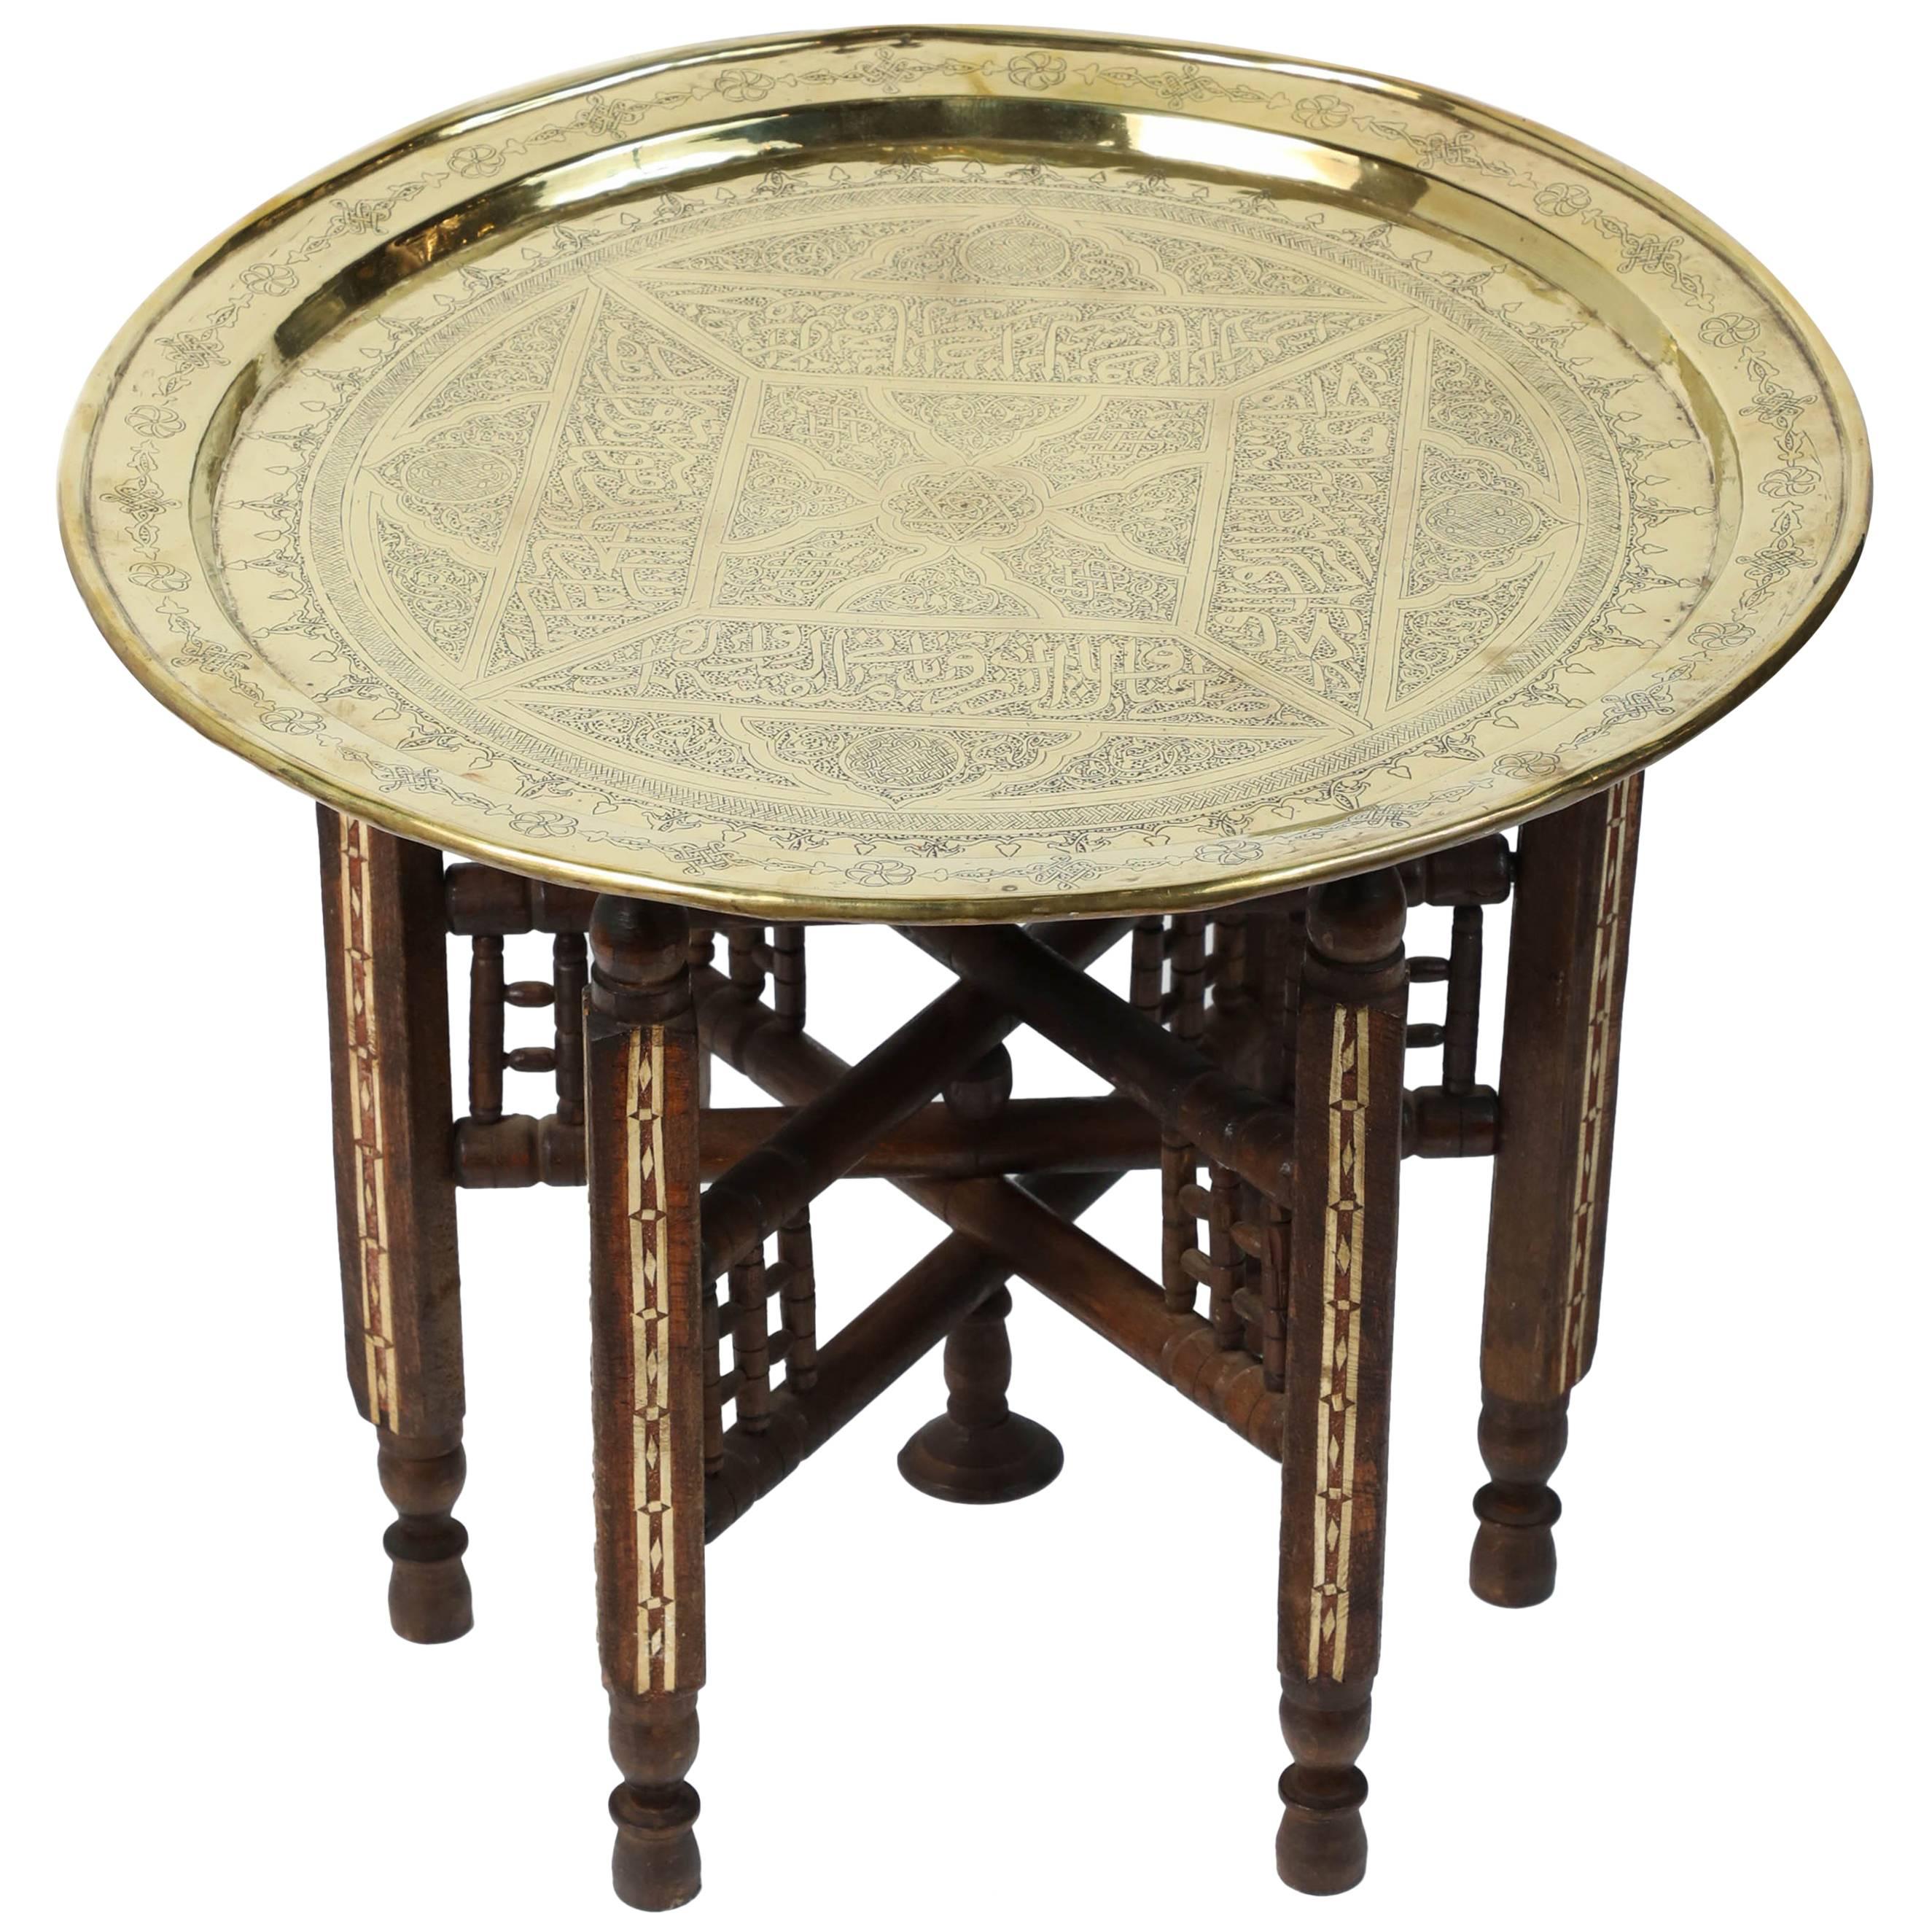 Middle Eastern Syrian Antique Brass Tray Table with Wooden Folding Stand